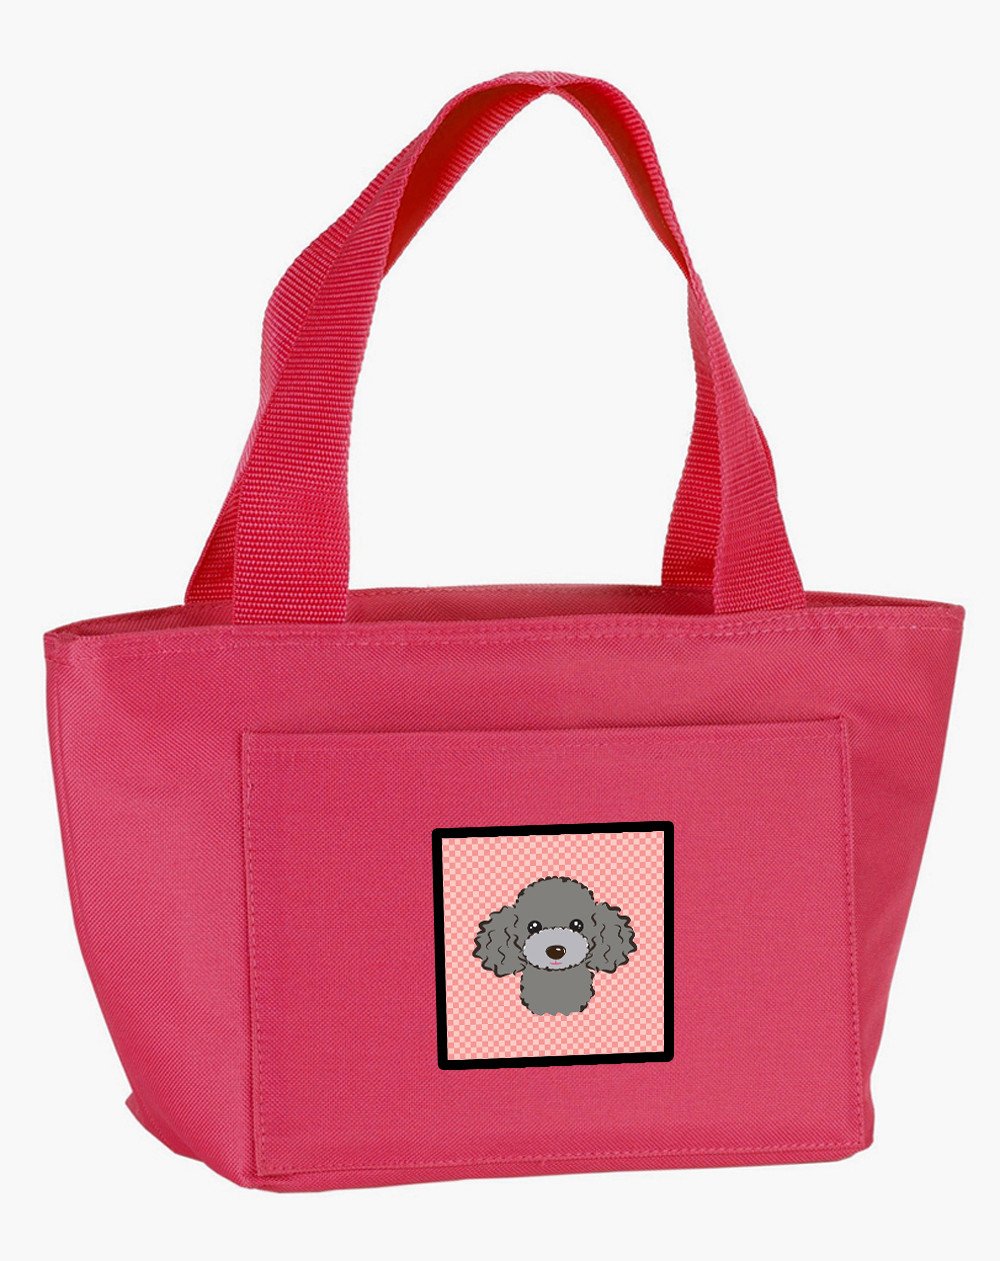 Checkerboard Pink Silver Gray Poodle Lunch Bag BB1259PK-8808 by Caroline's Treasures